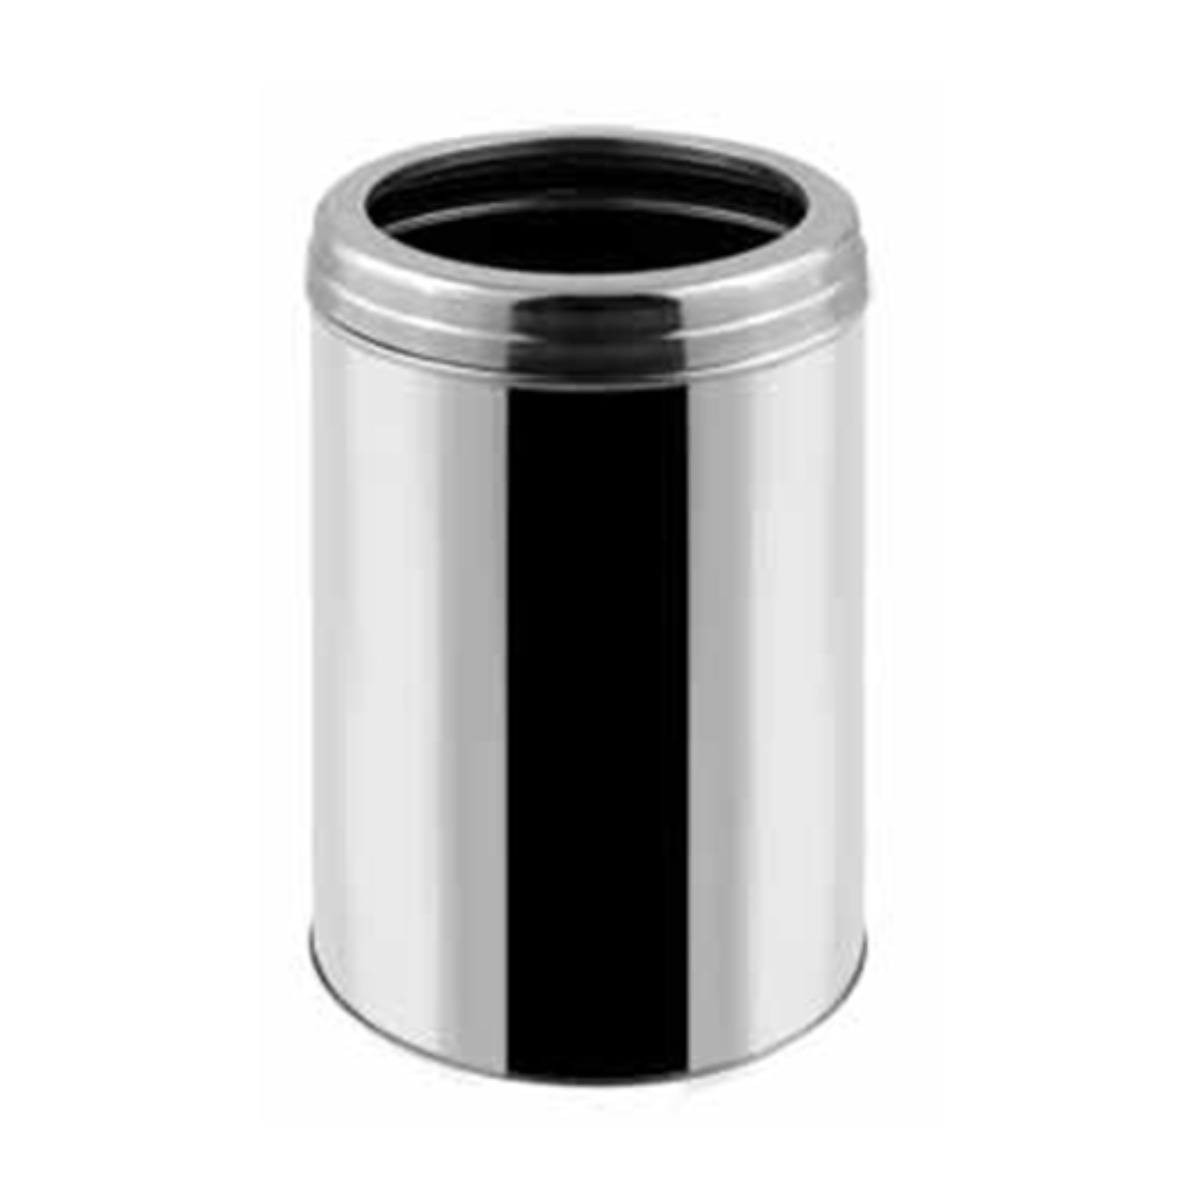 AB-209 Classic Trash Can product logo